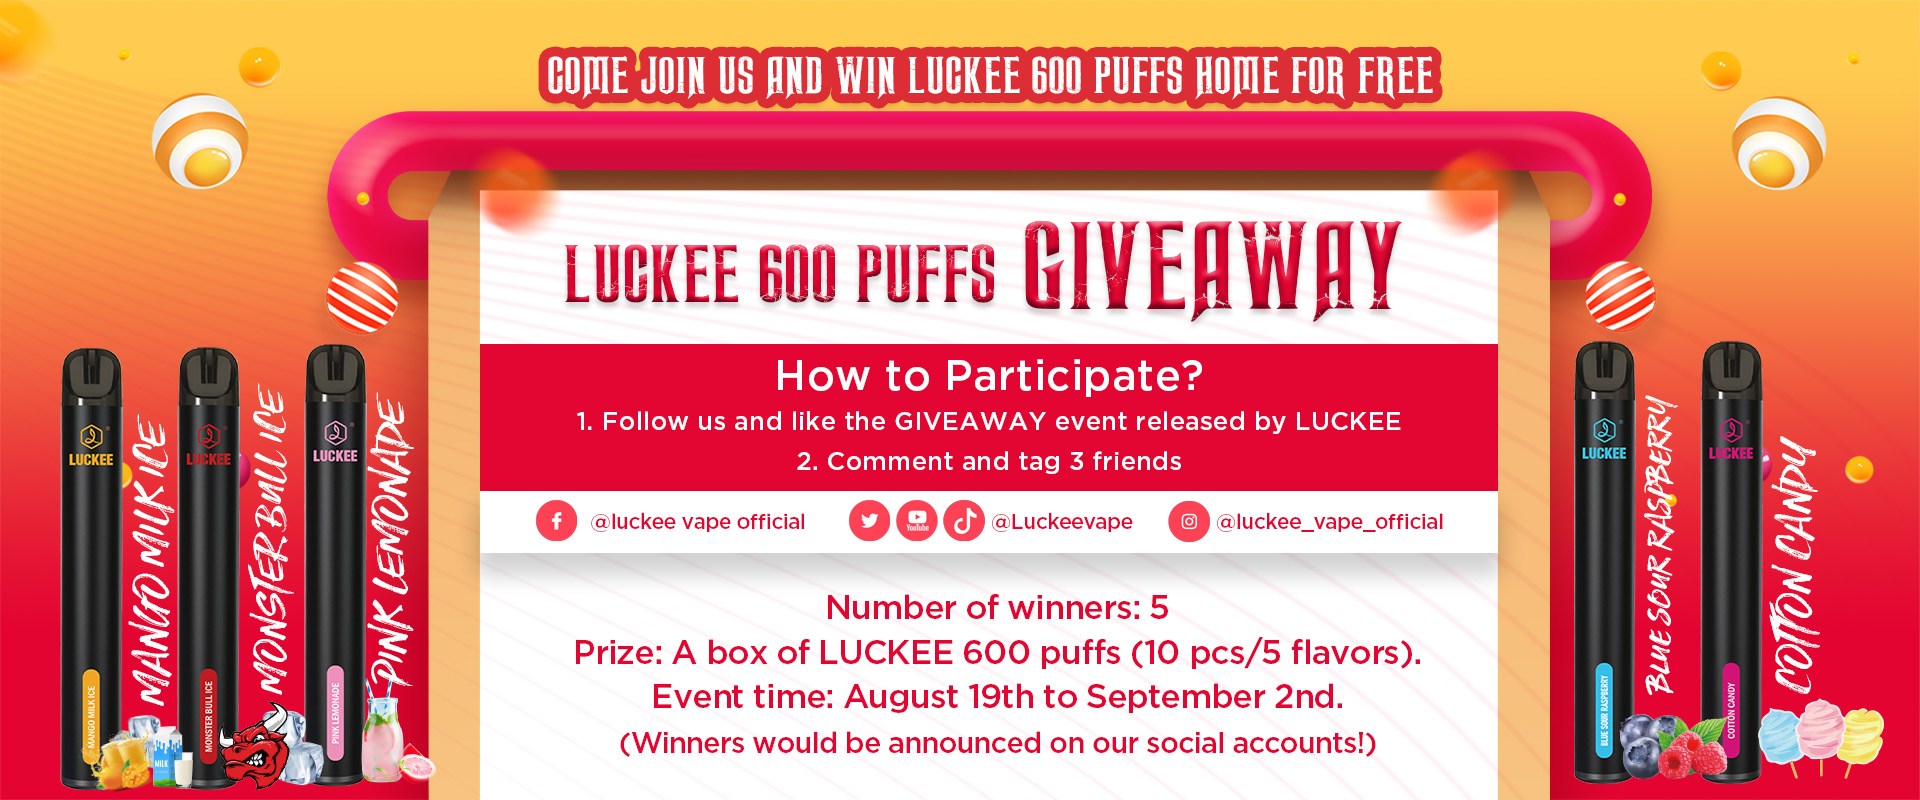 luckee 600 puffs giveaway